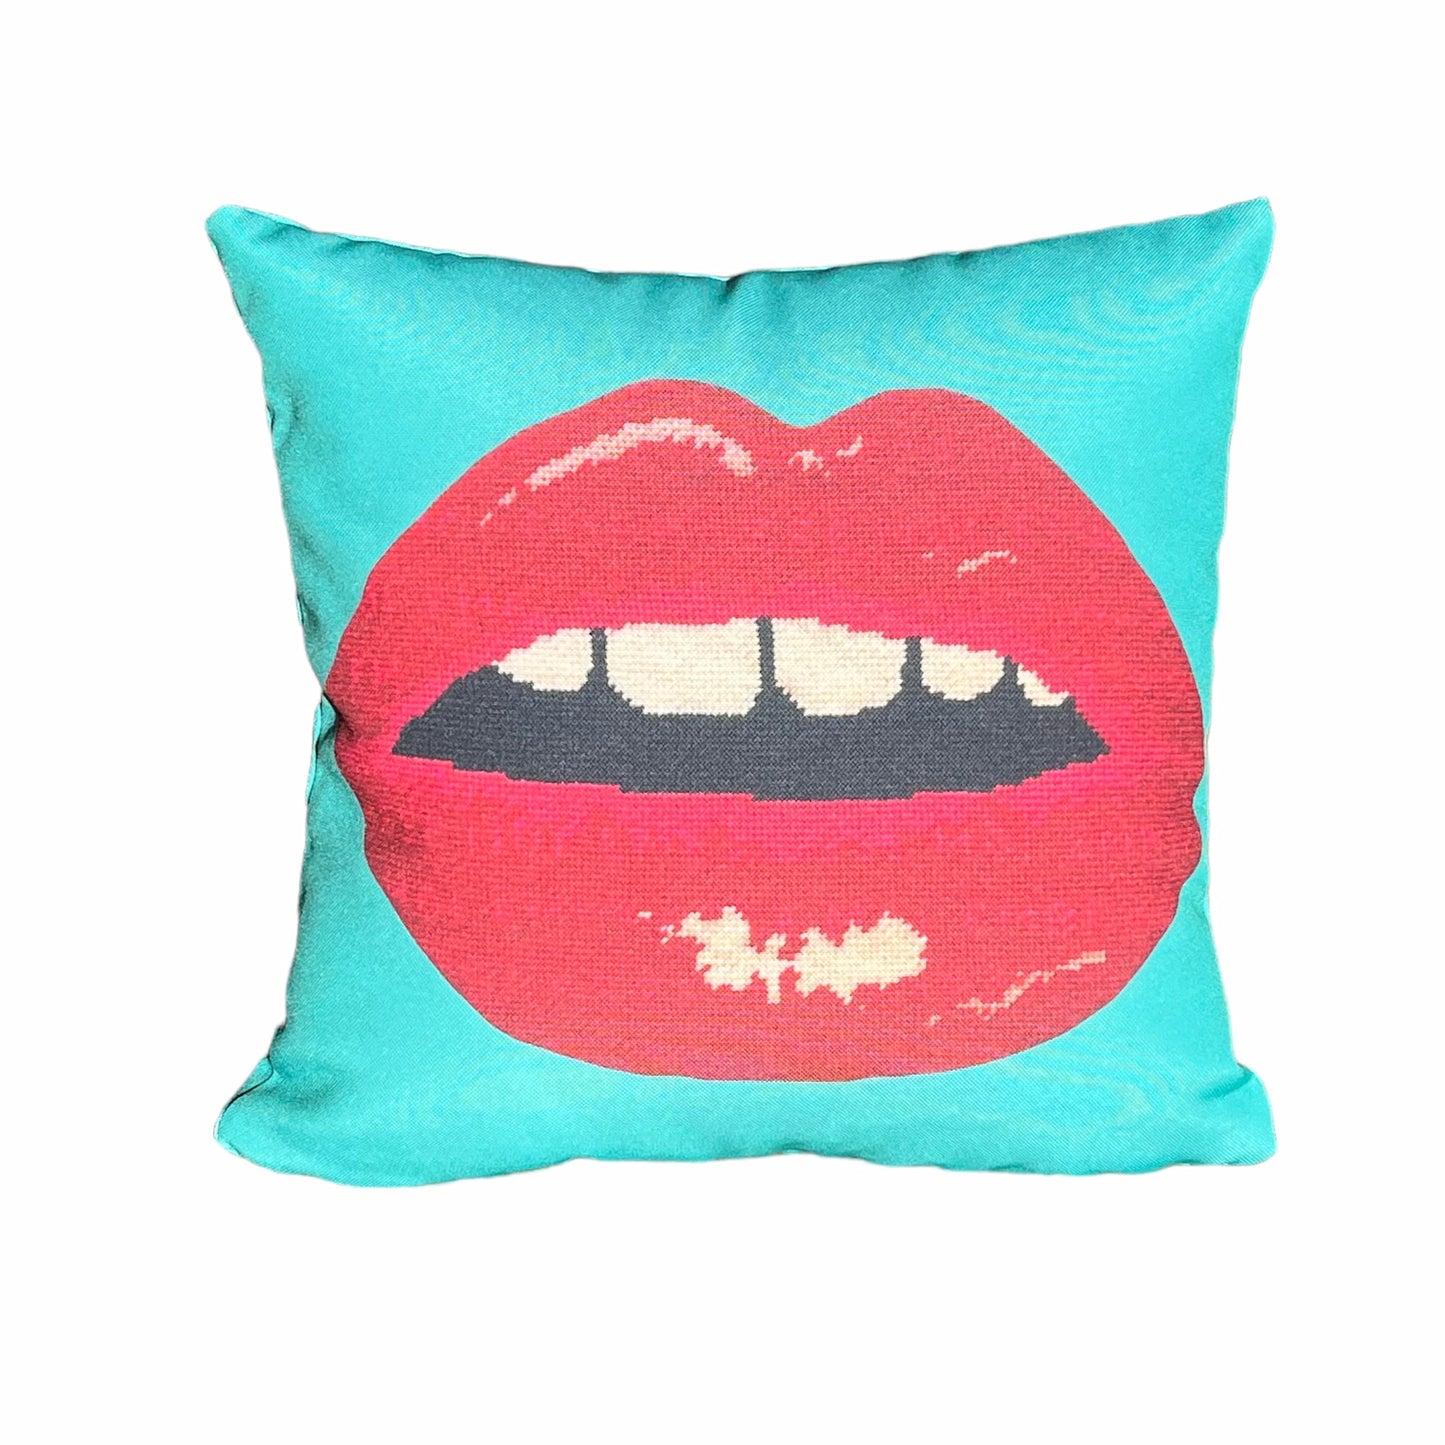 outdoor-friendly EMBRASSE MOI lips design pillow cover